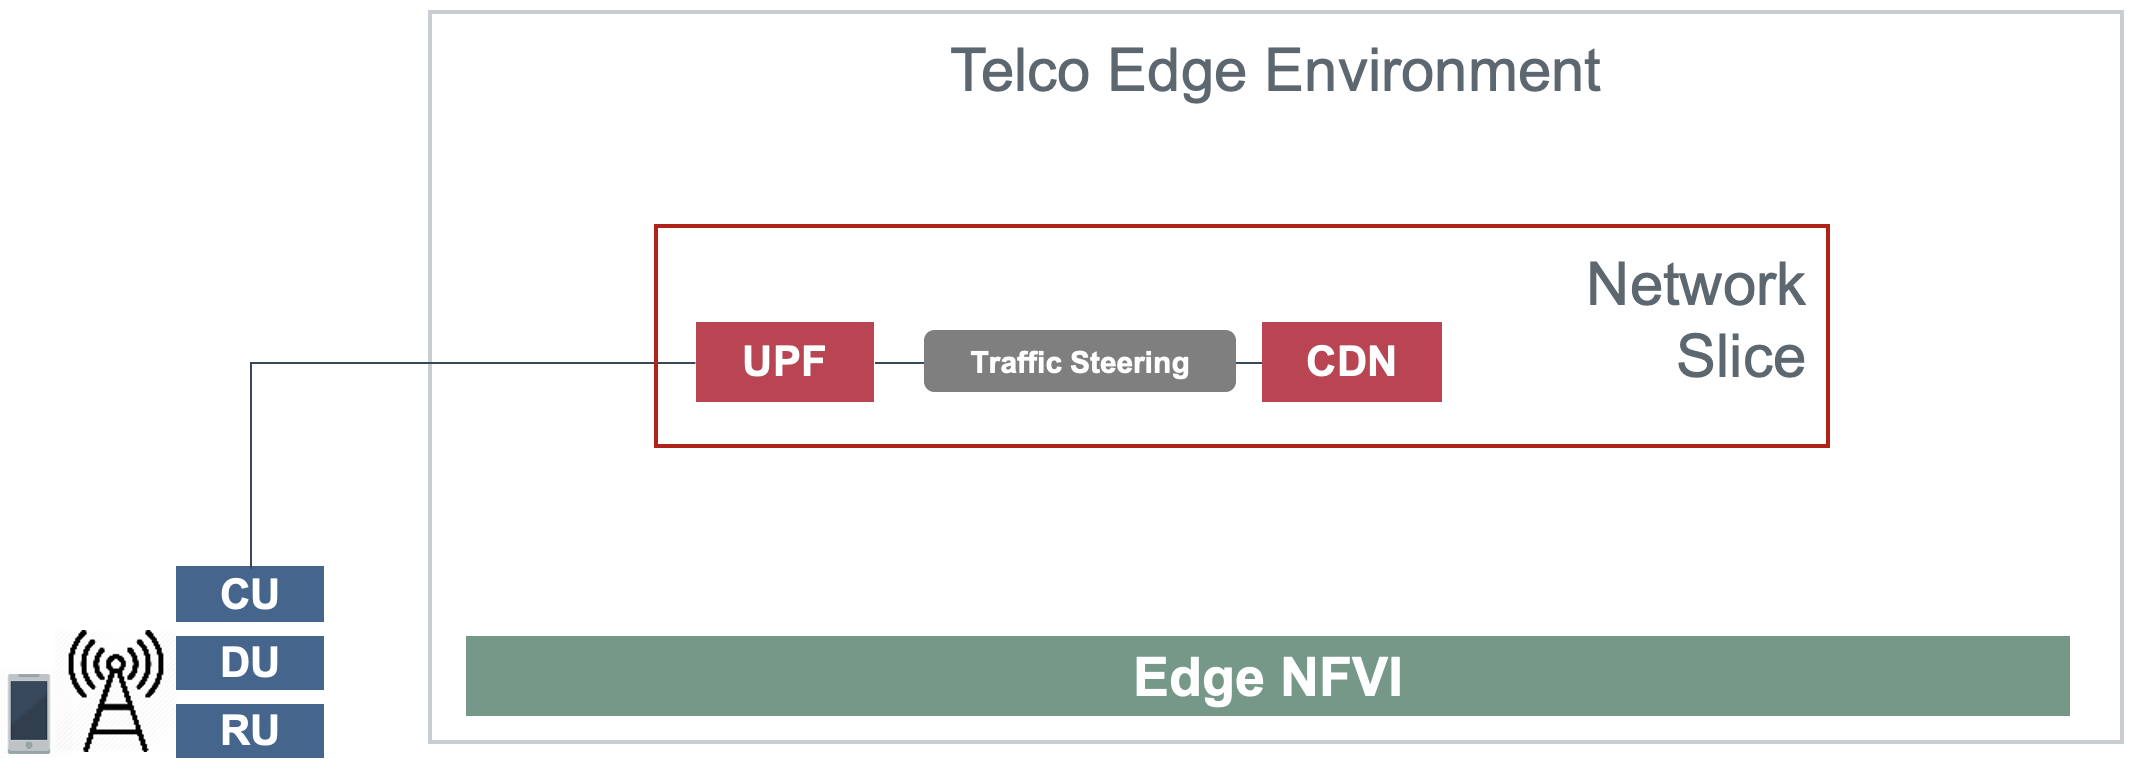 "Figure 2-1: Edge CDN with eMBB Core Network Slicing"